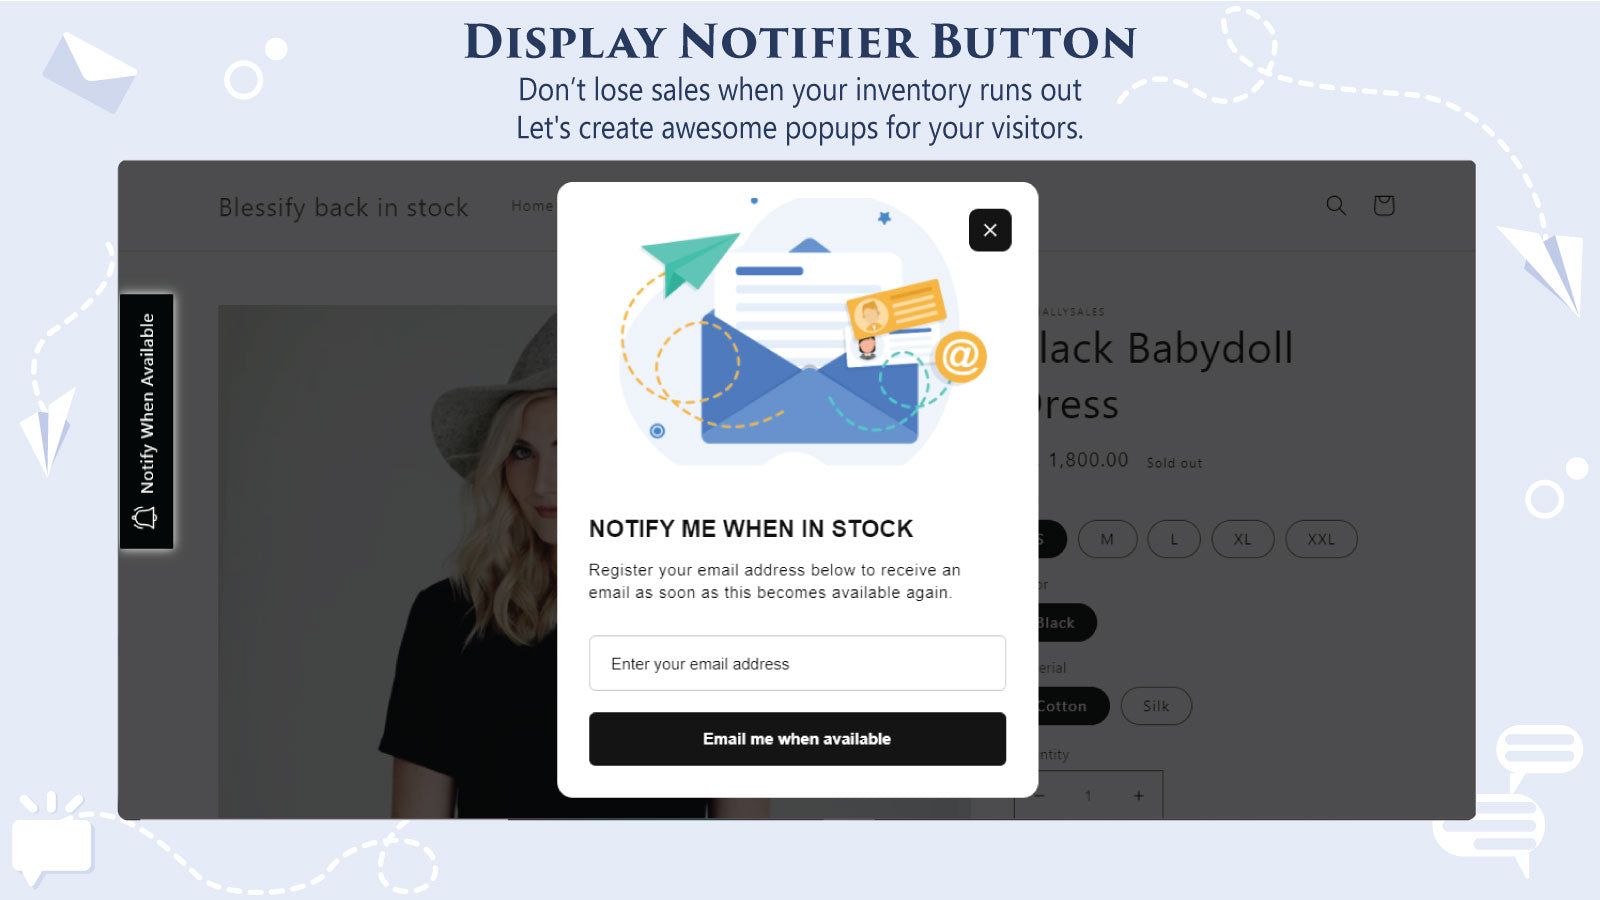 Display notifier button and popup